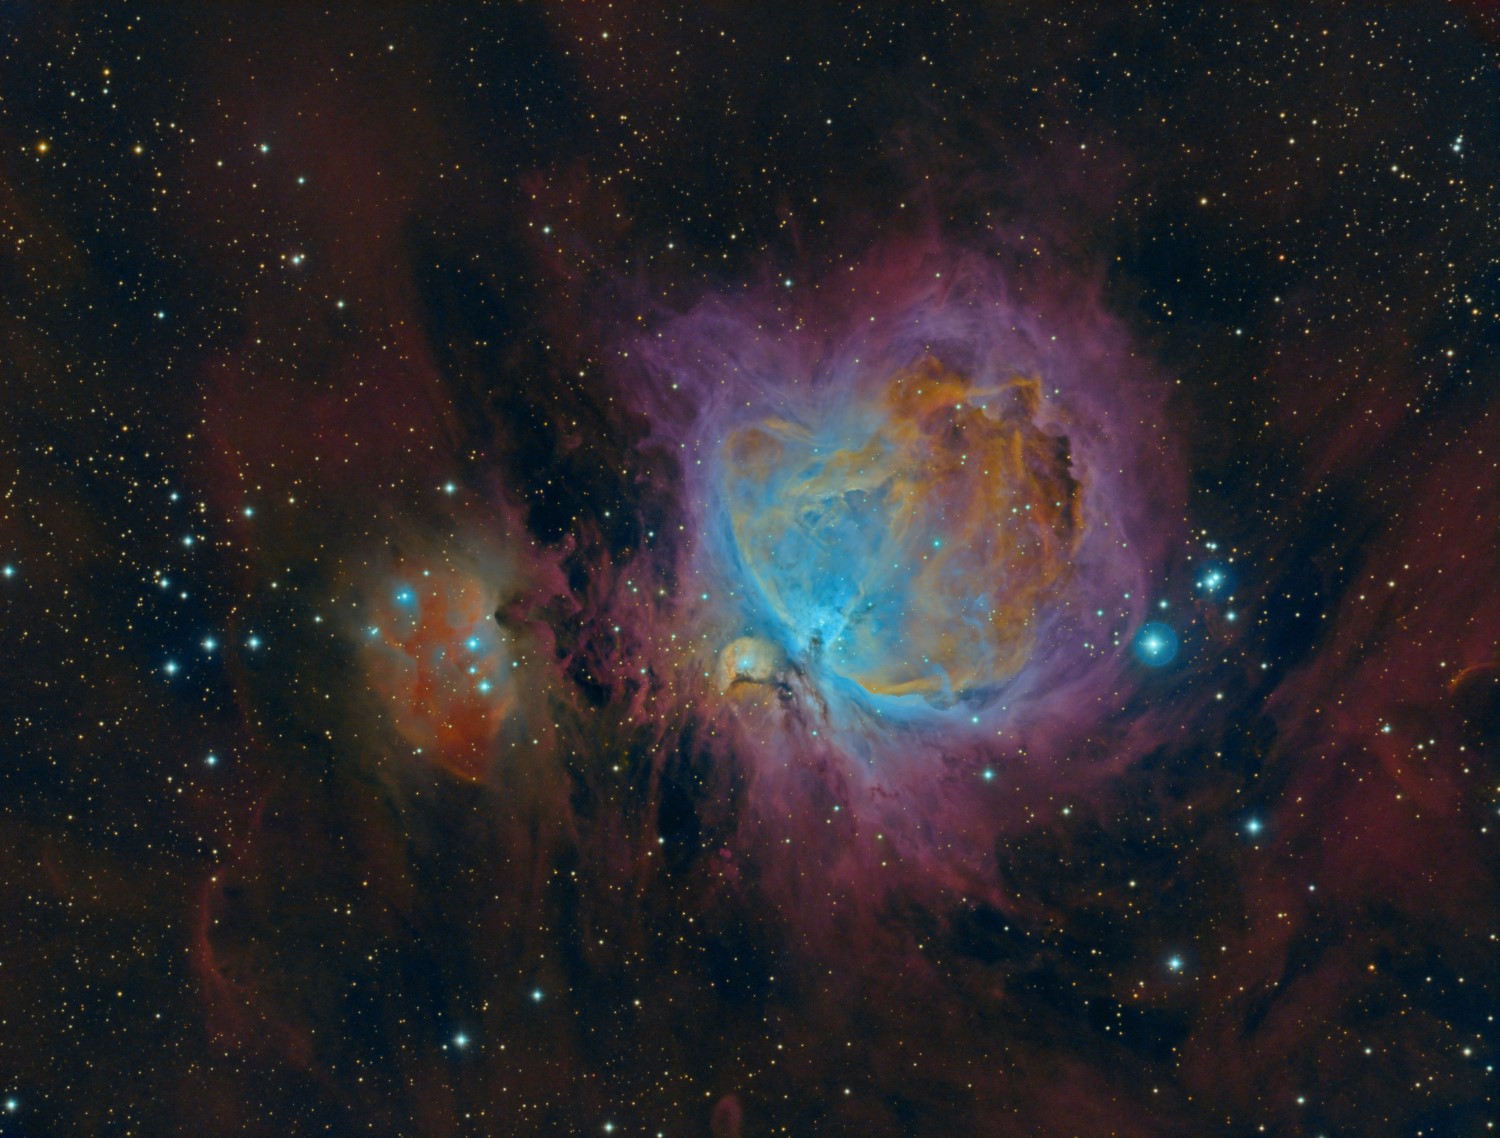 dimred with narrowband images